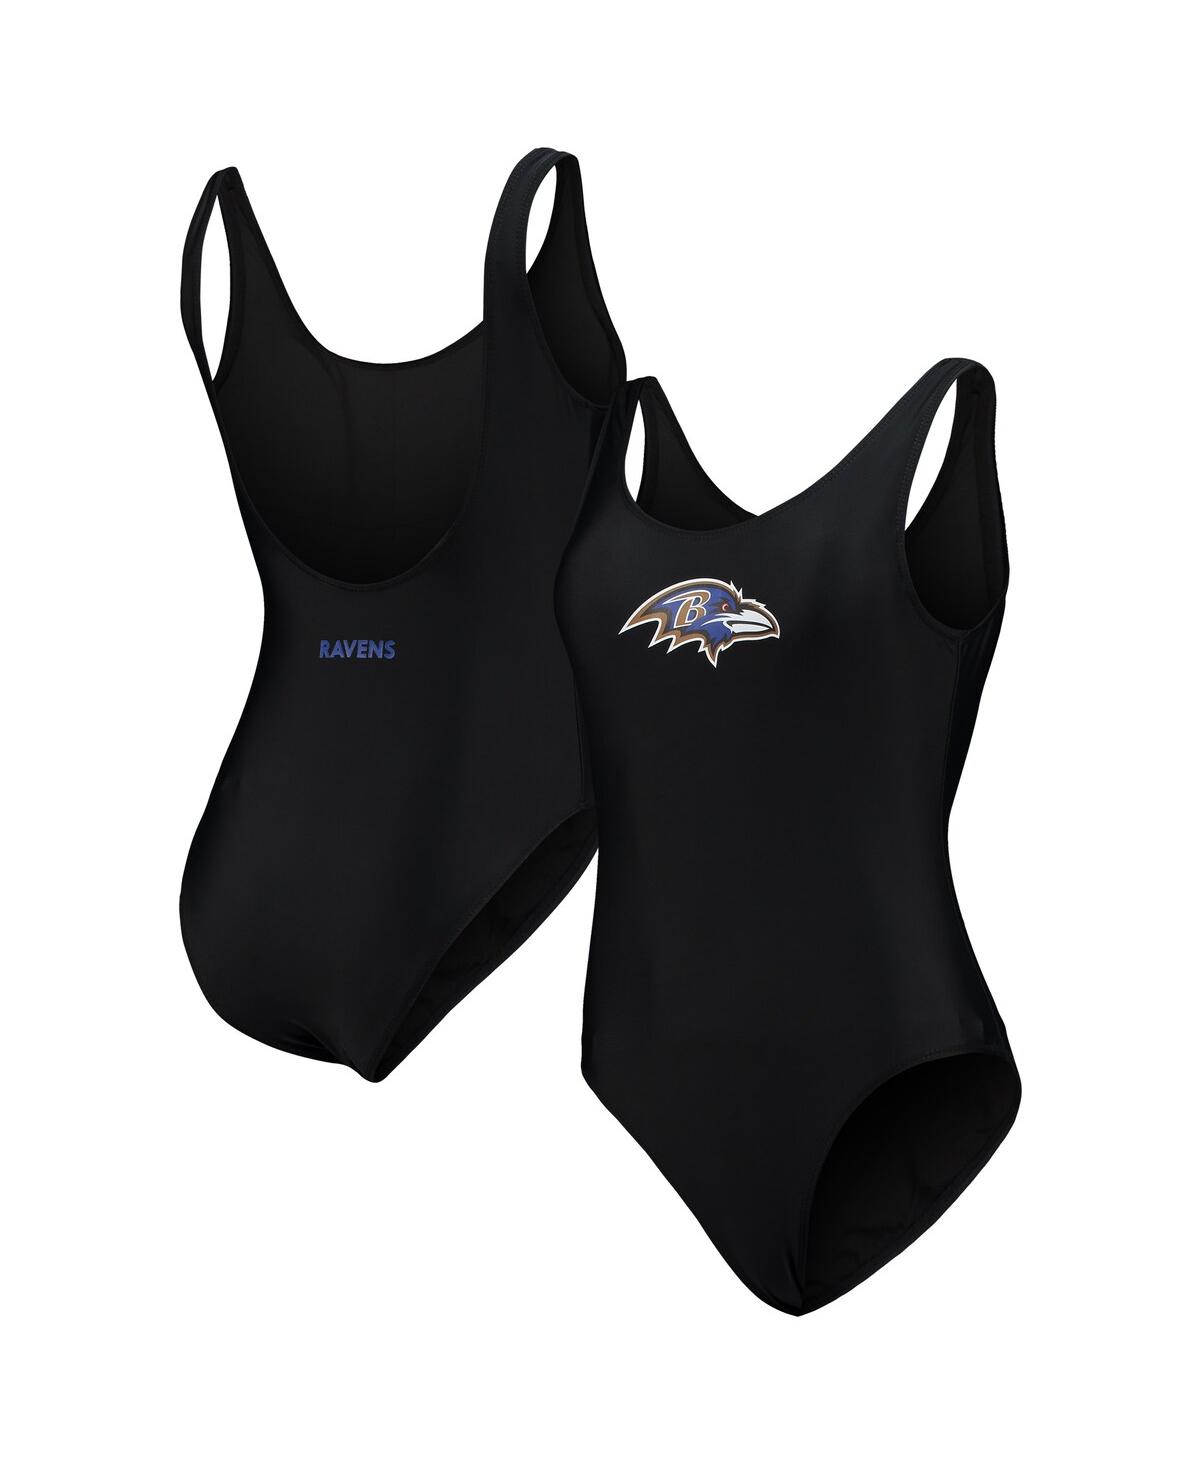 Women's G-iii 4Her by Carl Banks Black Baltimore Ravens Making Waves One-Piece Swimsuit - Black